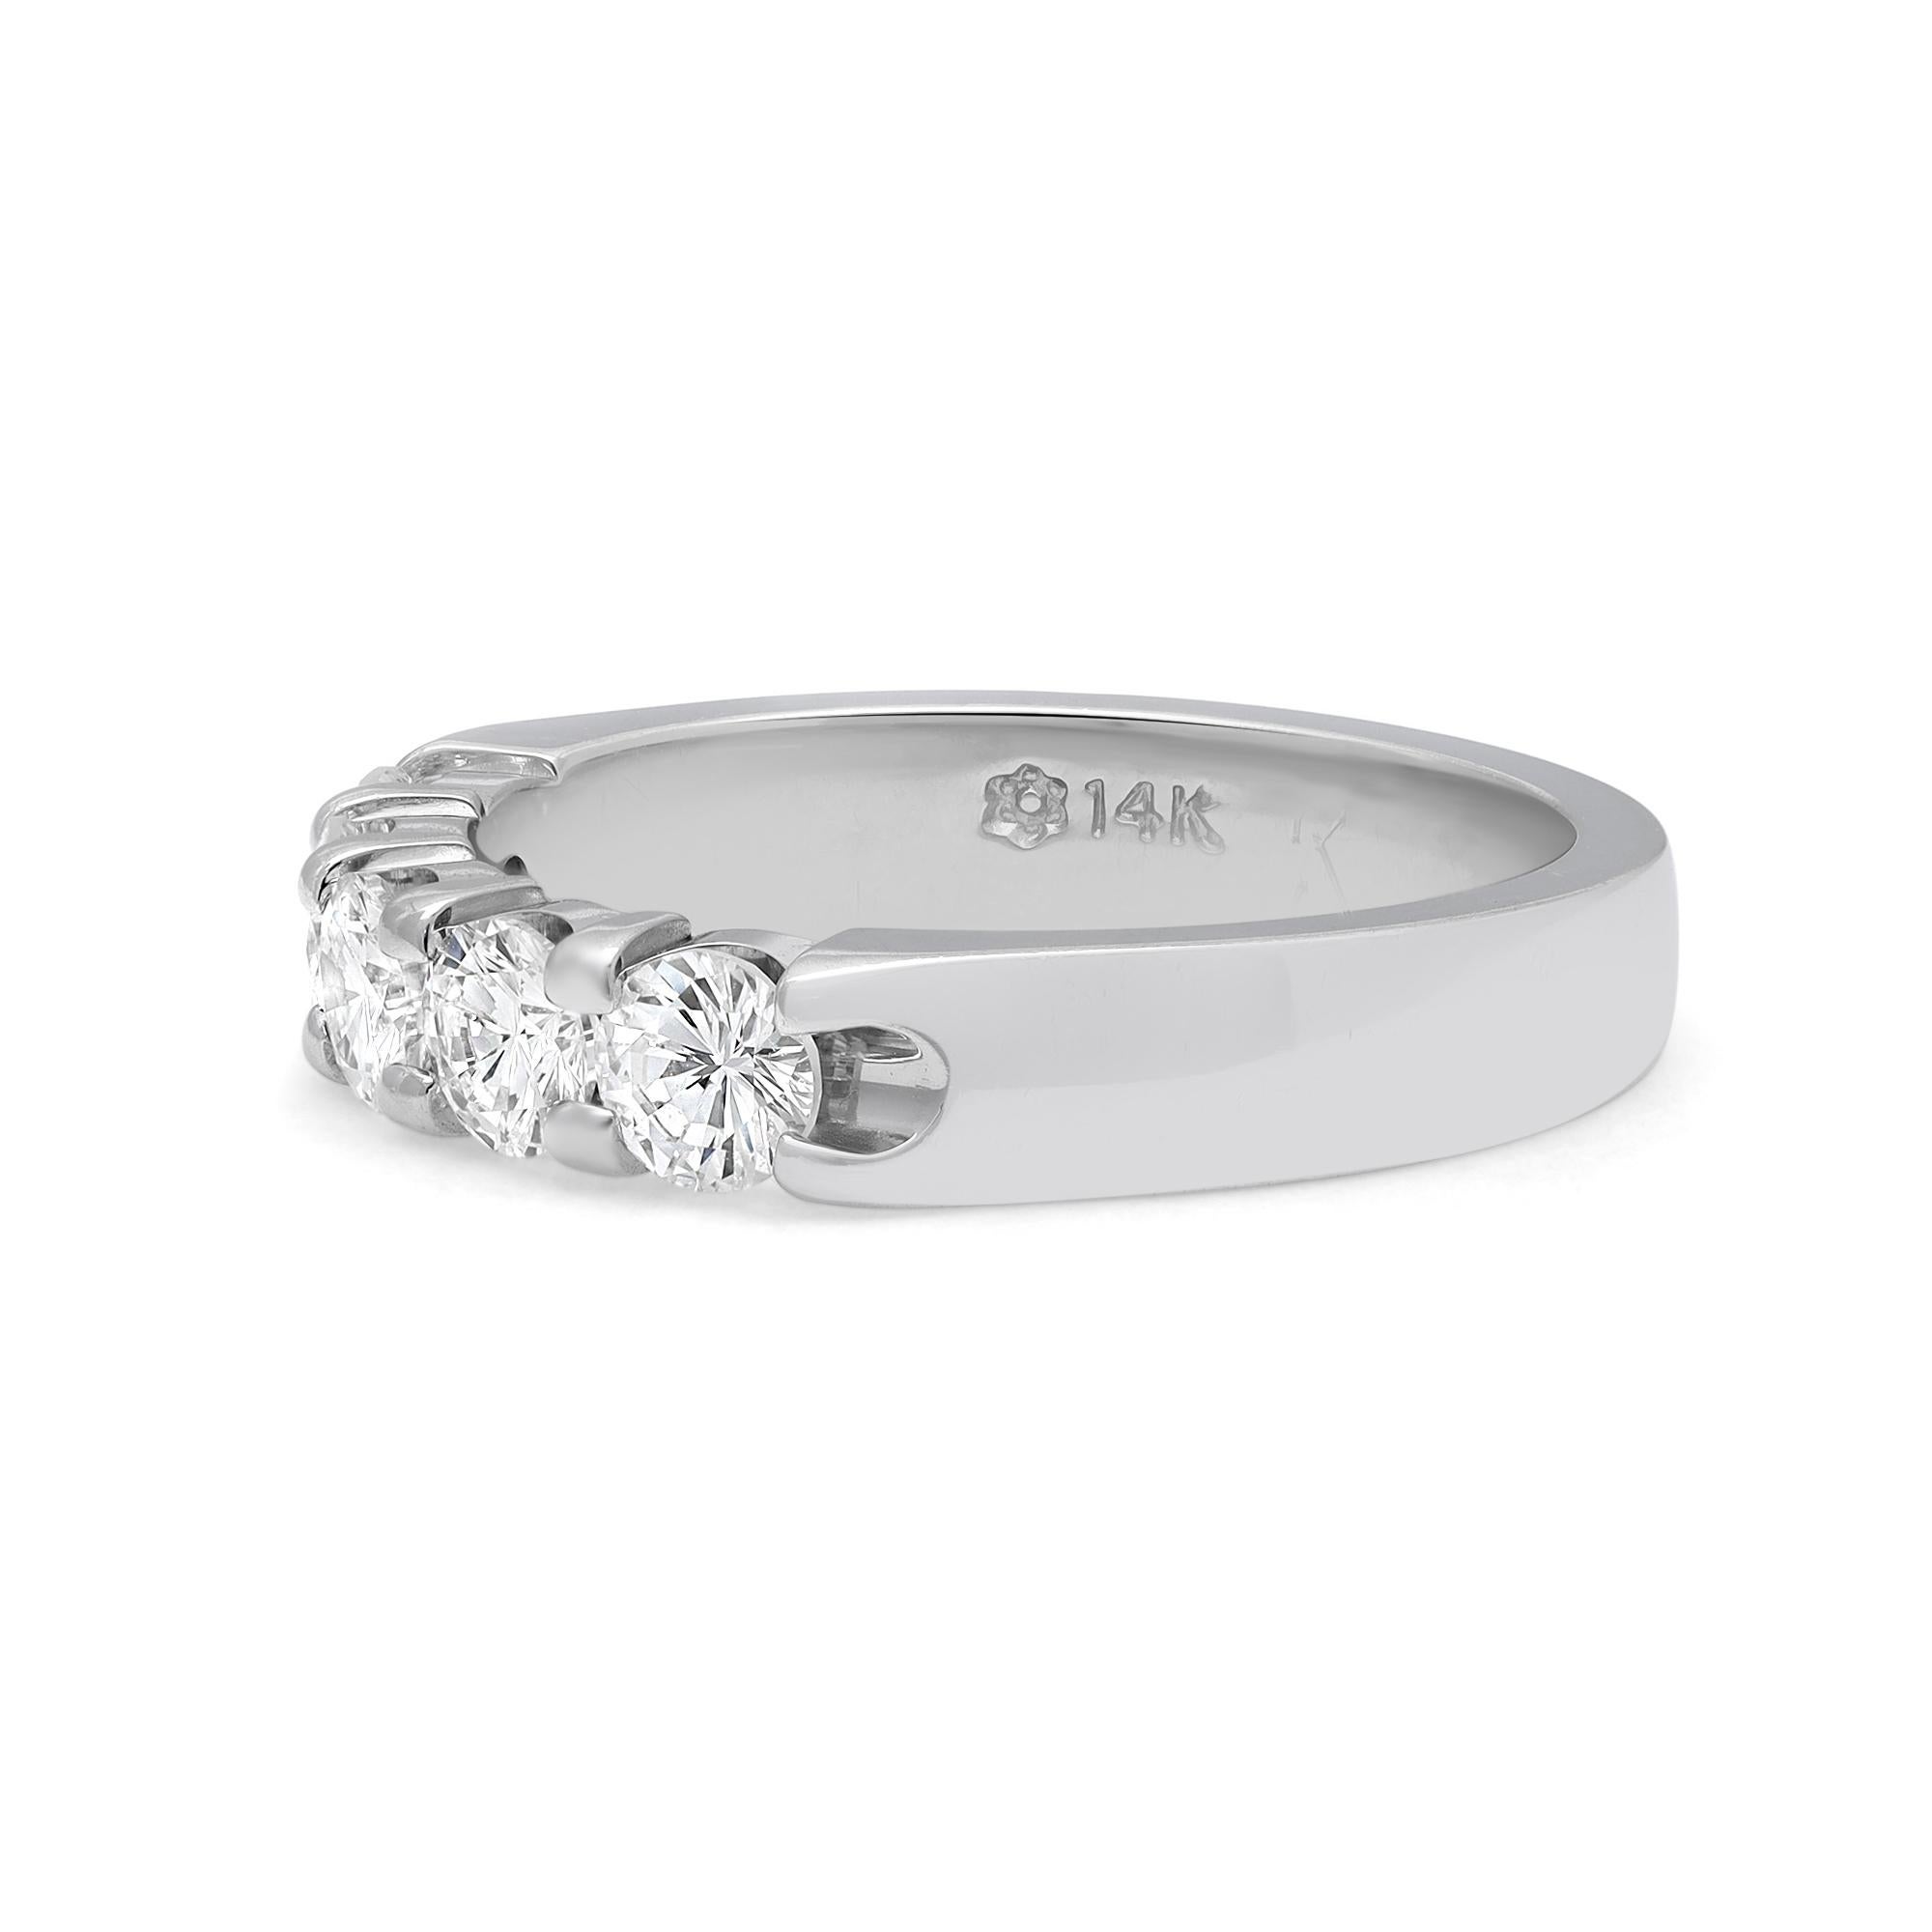 Gorgeous diamond band ring, crafted in highly polished 14k white gold. This timeless wedding band is encrusted with 5 round brilliant cut dazzling diamonds in a shared prong setting. Total diamond weight: 1.00 carat. Diamond color G and VS-SI